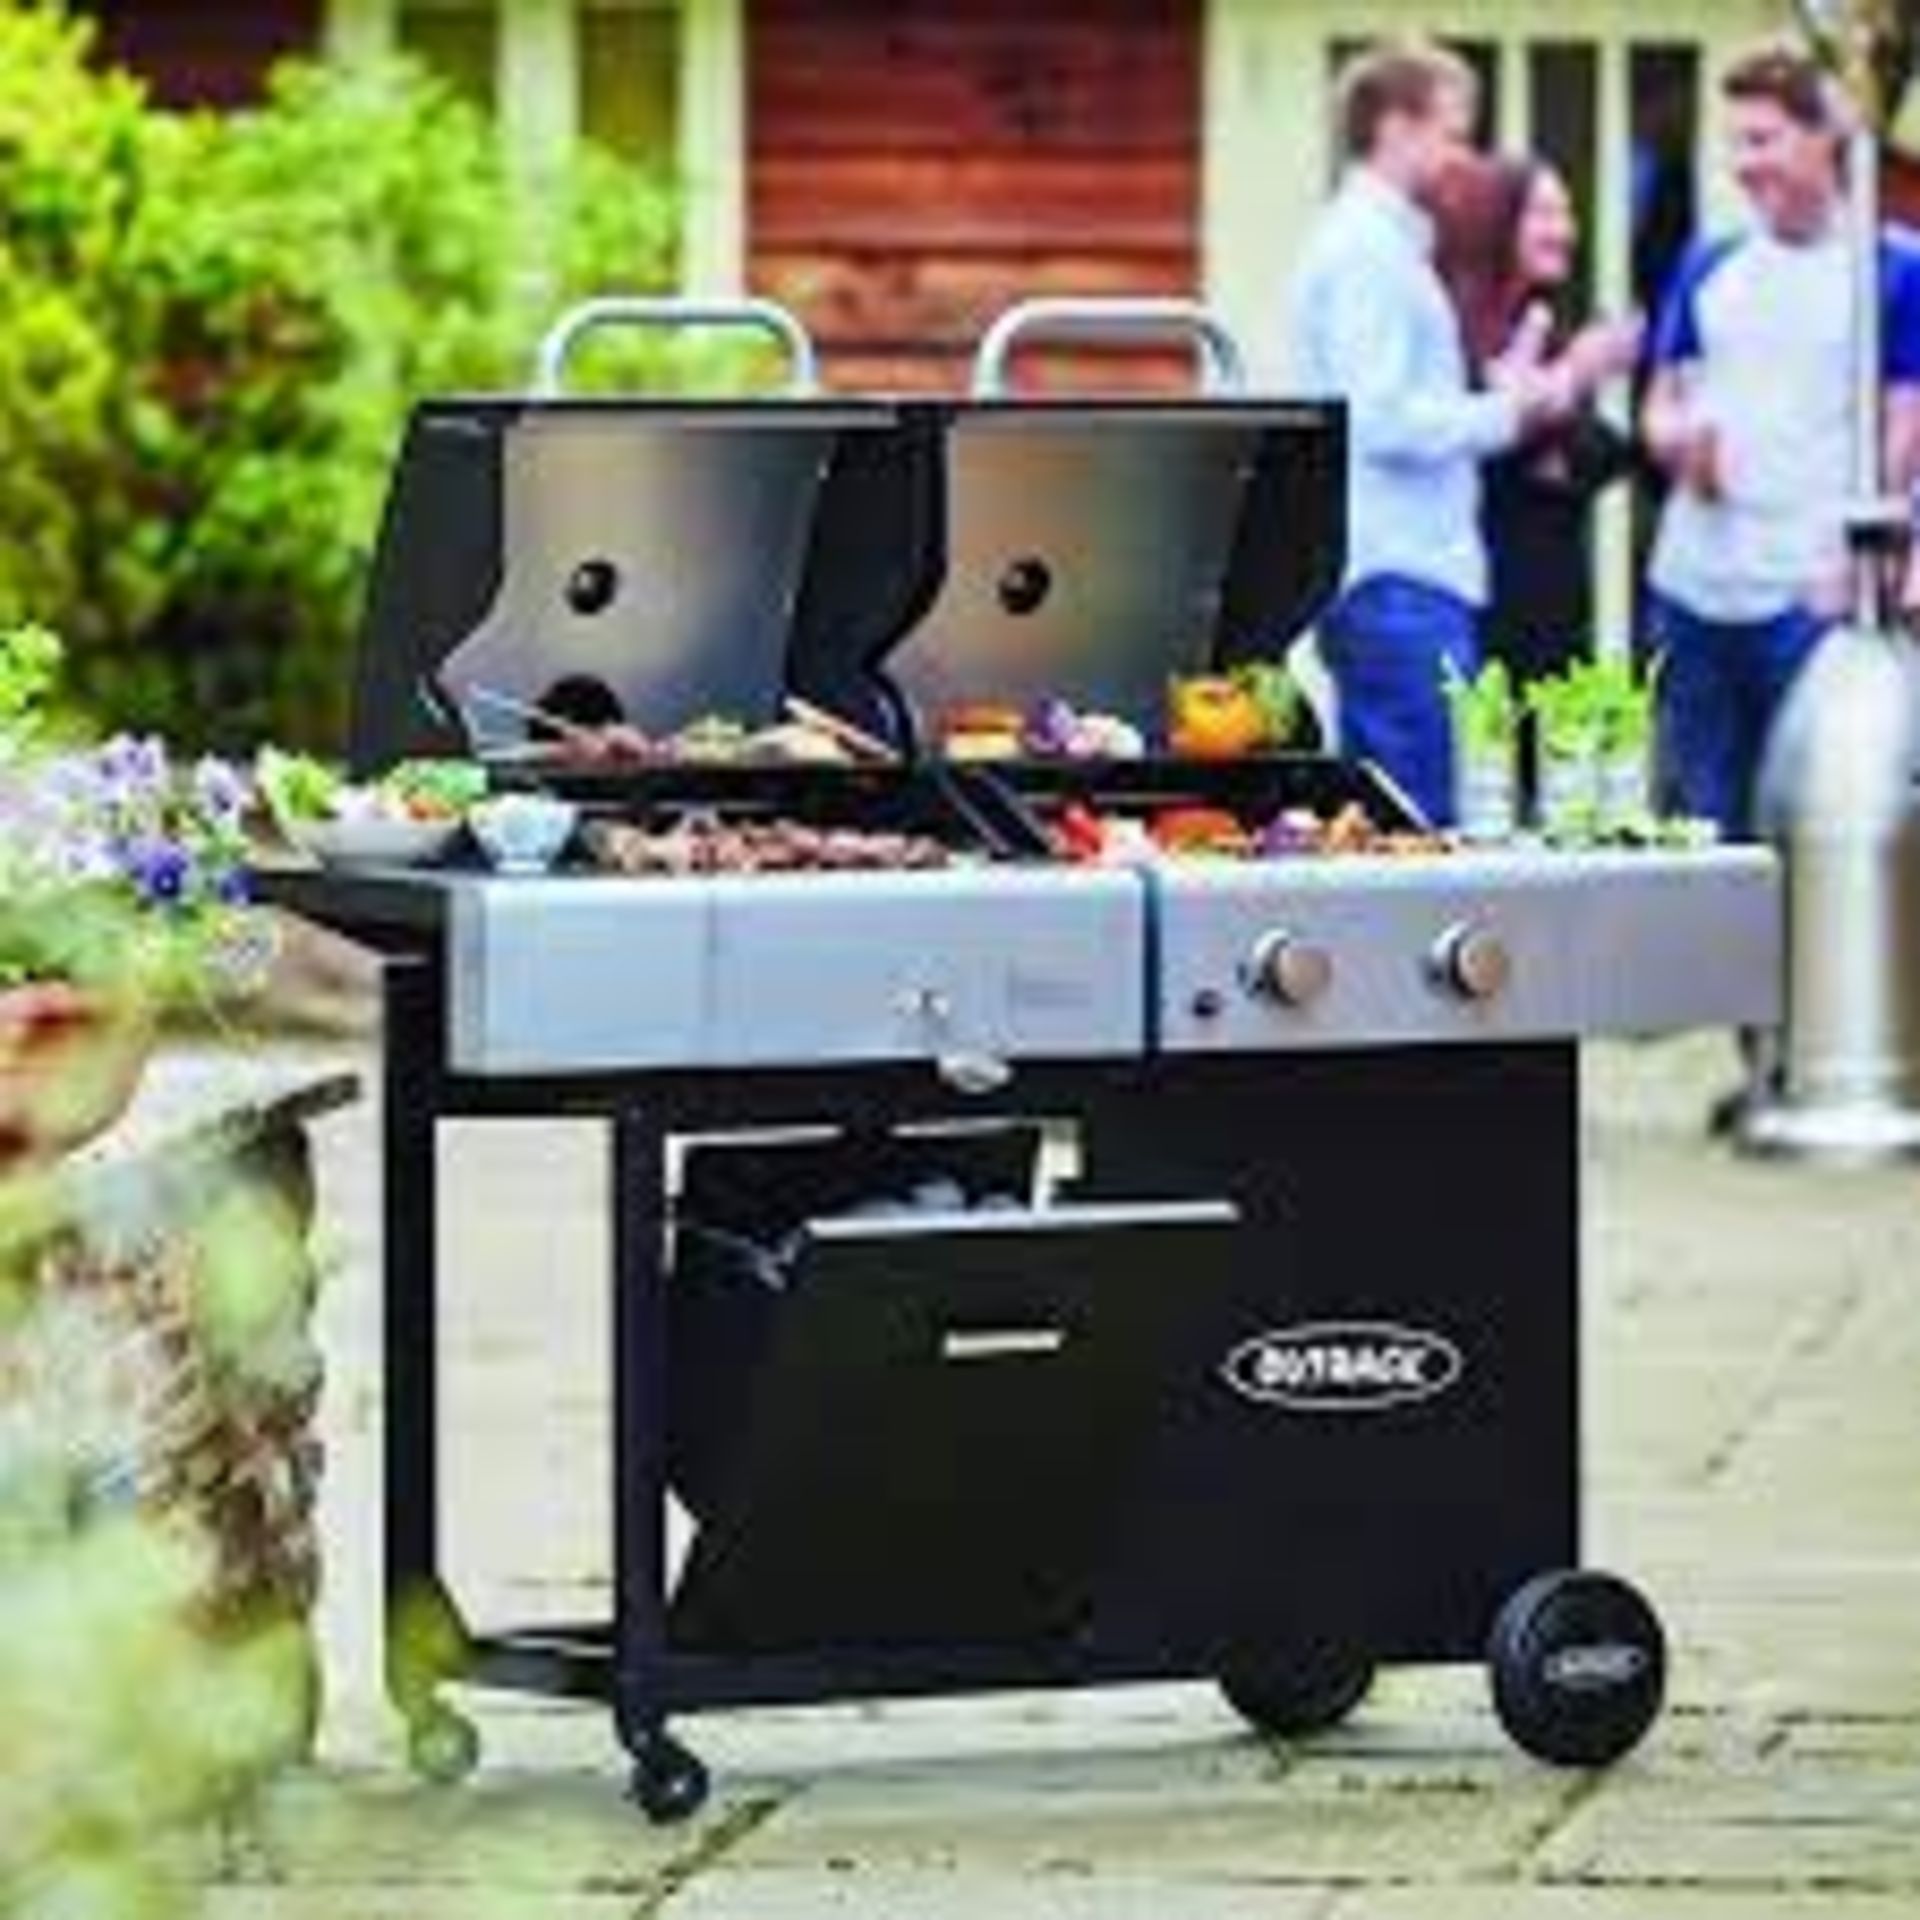 Outback 2 Burner Combi Hooded Gas And Charcoal BBQ. - SR5. RRP £899.00. Outback Combi 2 burner